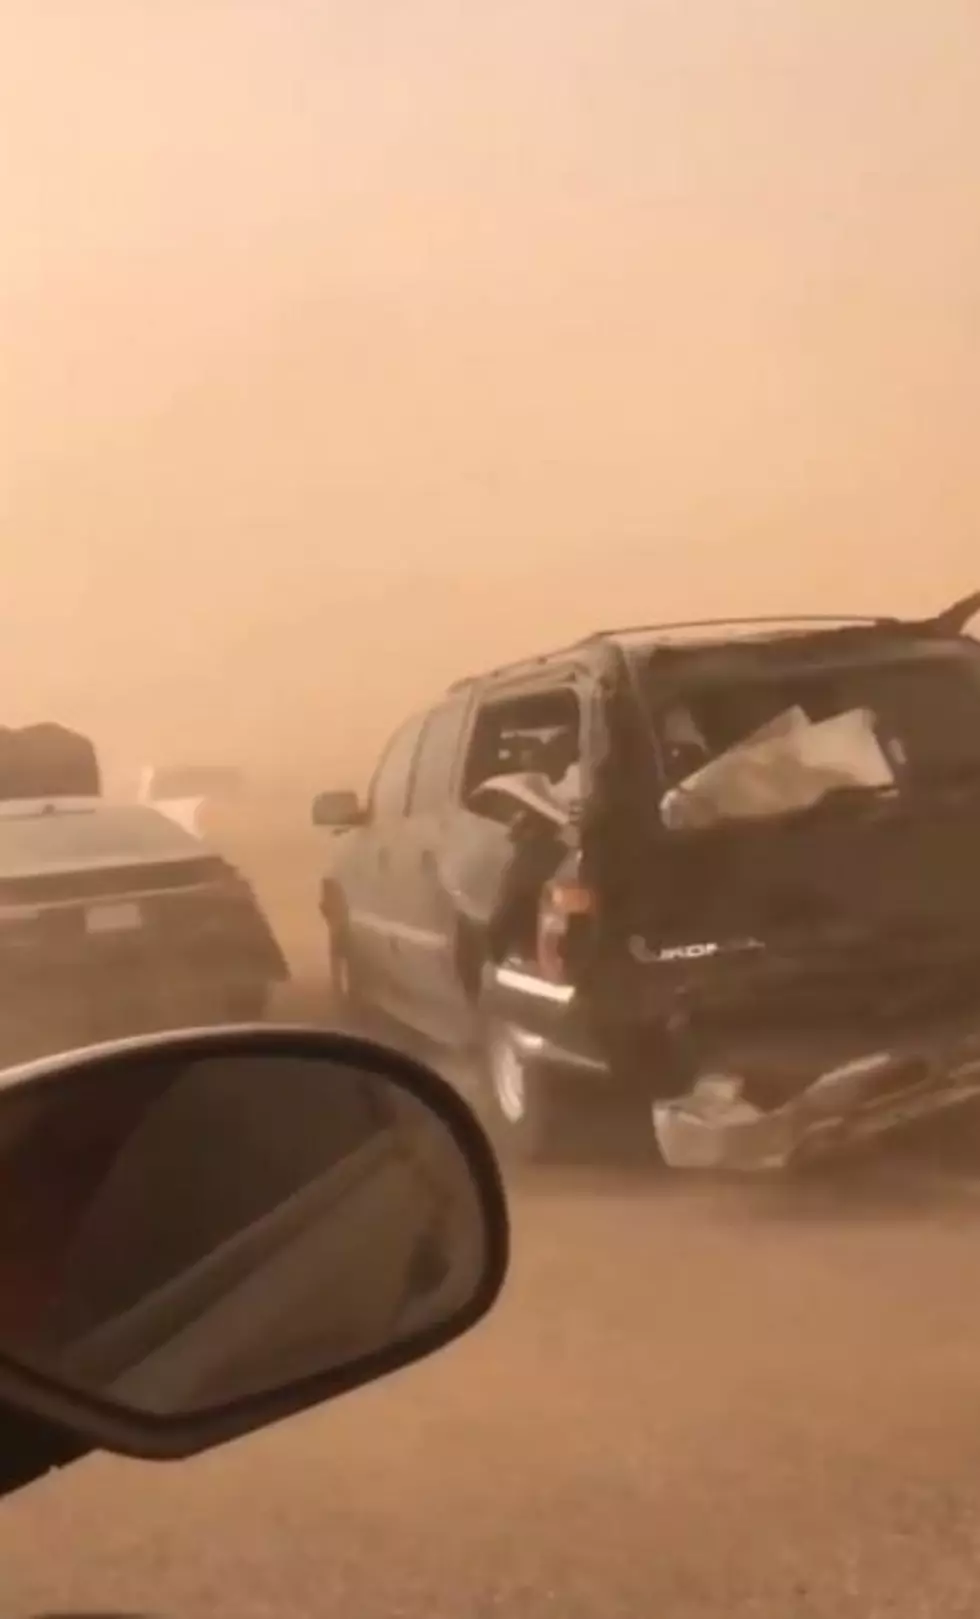 Dirt Storm in Texas Causes Havoc on the Highway [VIDEO]